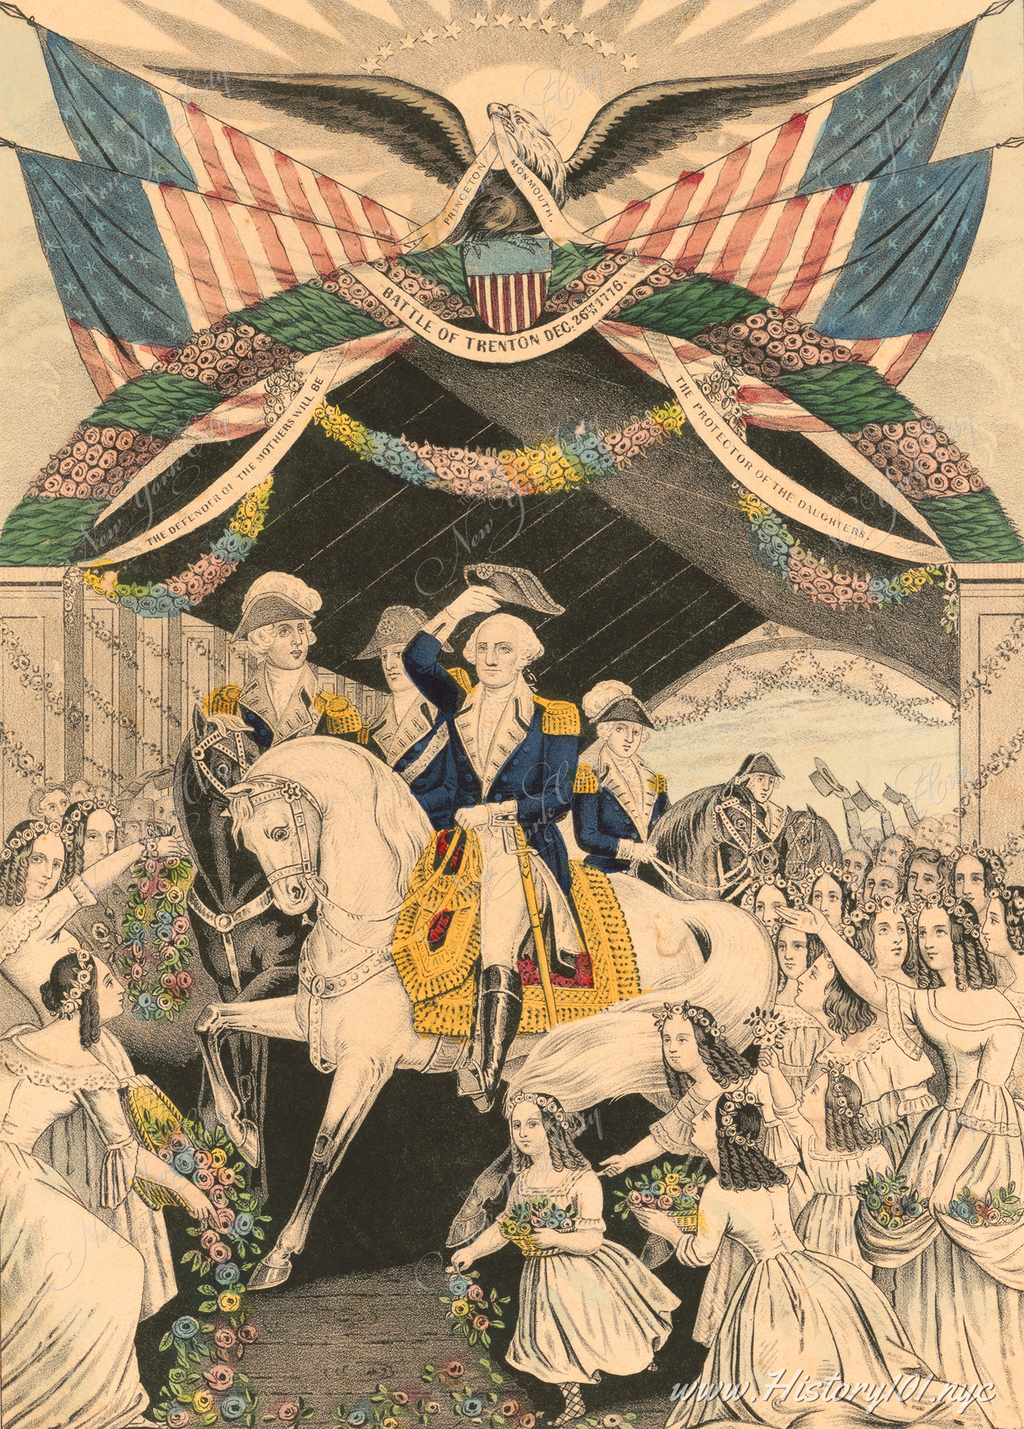 The illustration titled "Washington's Reception by the Ladies, on Passing the Bridge at Trenton, N.J." captures a momentous and symbolic event in American history. 